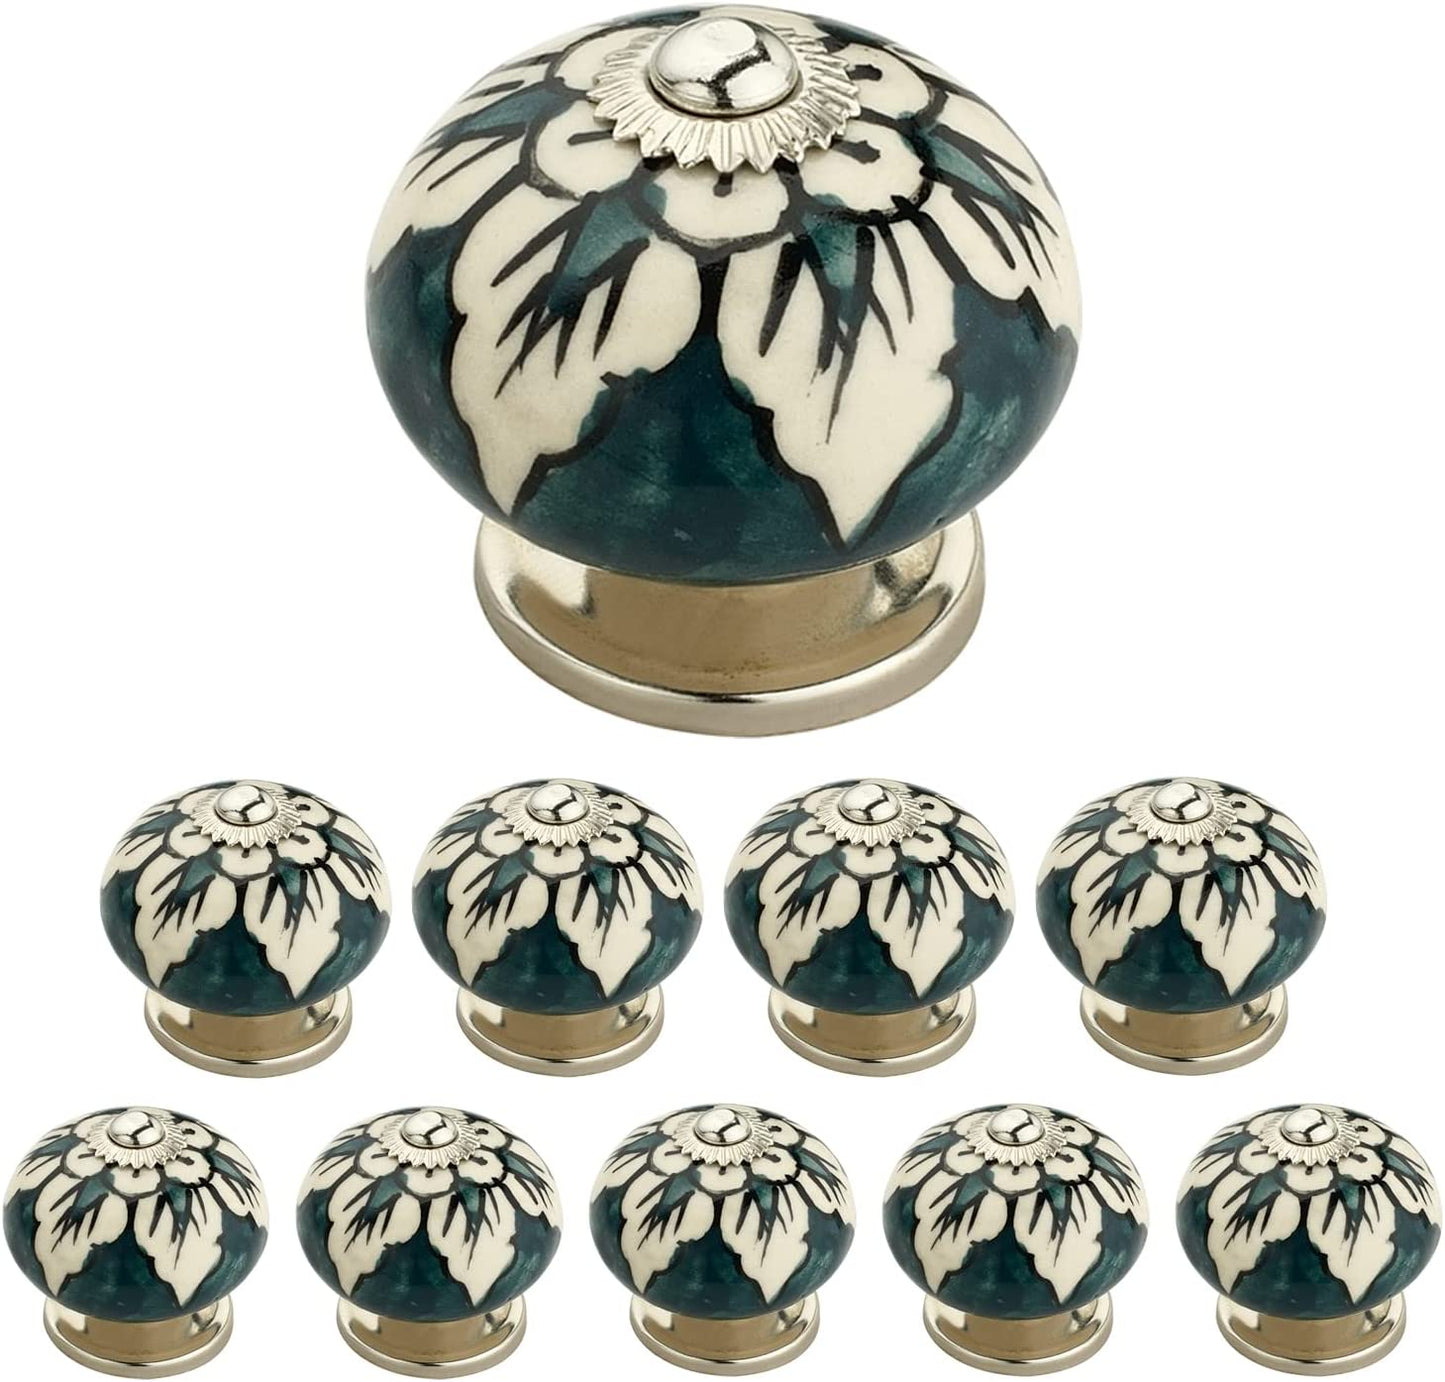 Grassed 1-2/3 in. Green & White Cabinet Knob (Pack of 10)